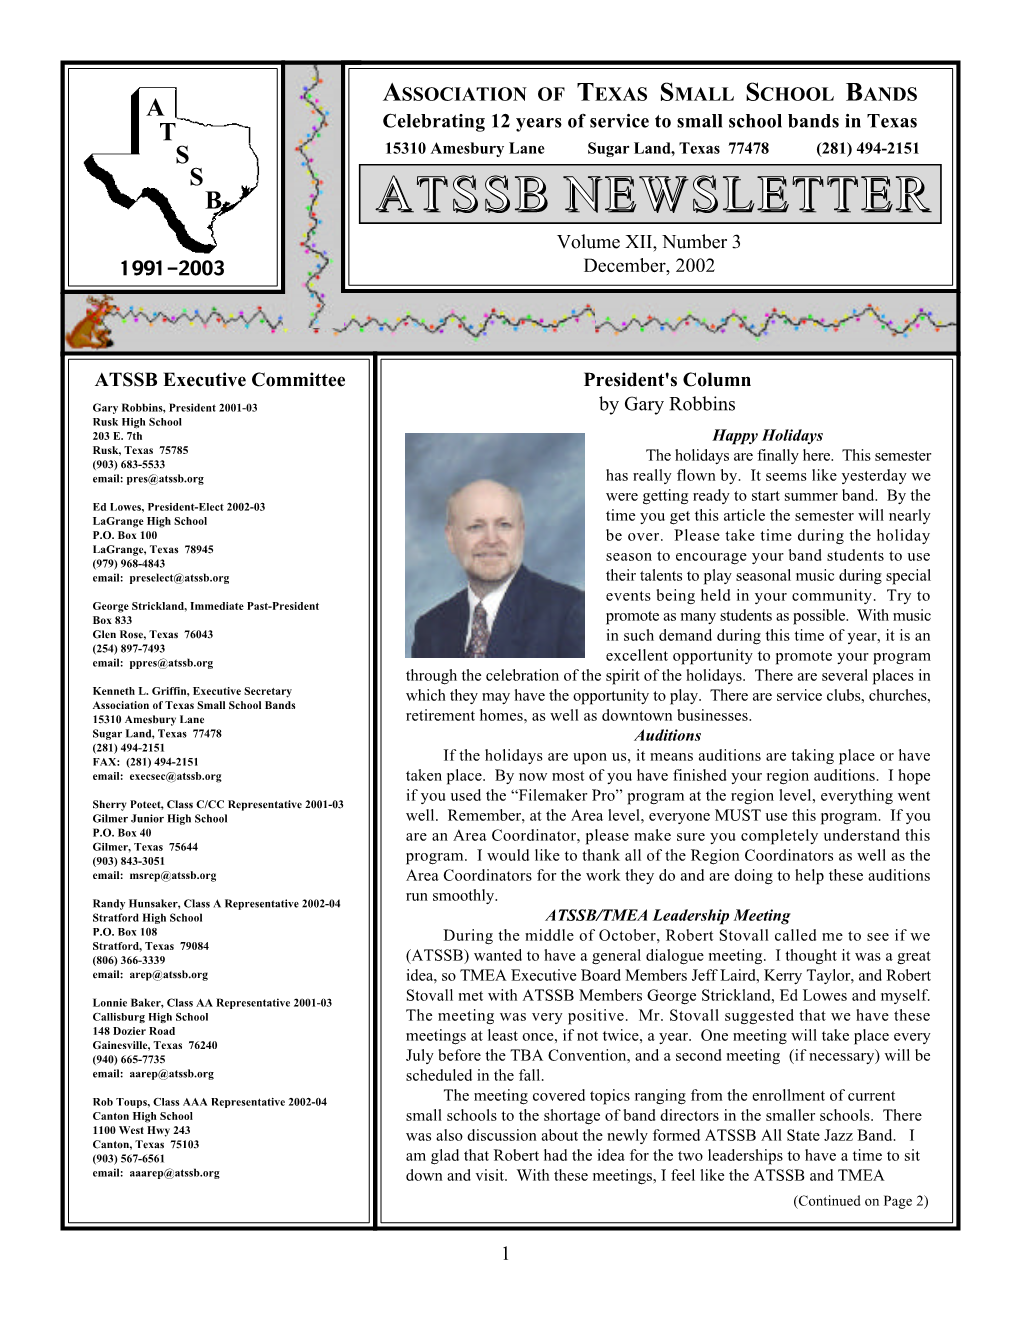 ATSSB Newsletter Is the Official Publication of the Association of Texas Small School Bands